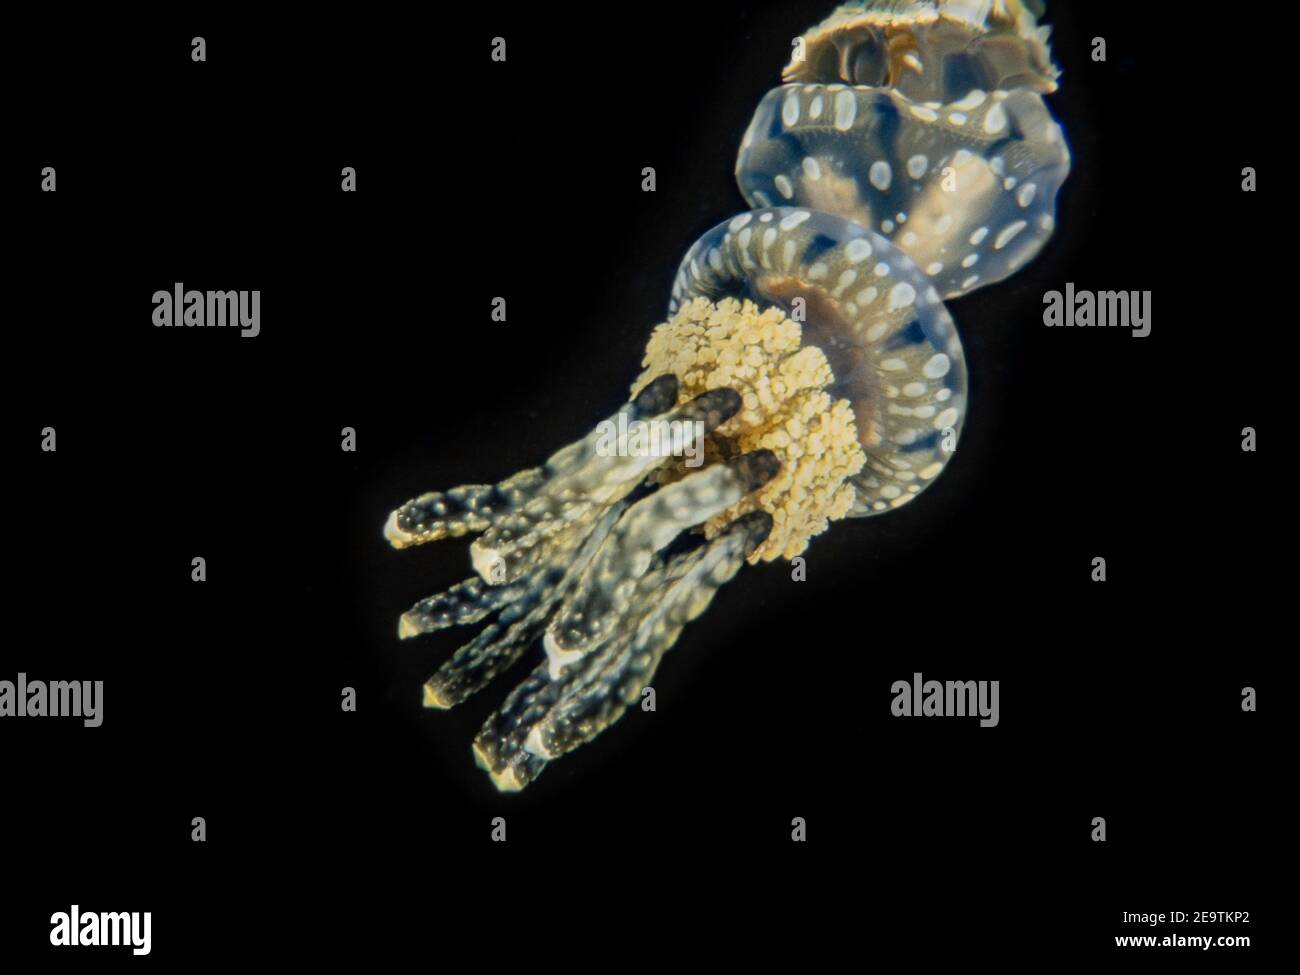 Spotted lagoon jellyfish or golden medusa, Mastigias papua, just below the surface at night in a lagoon, Palau, Micronesia. Stock Photo